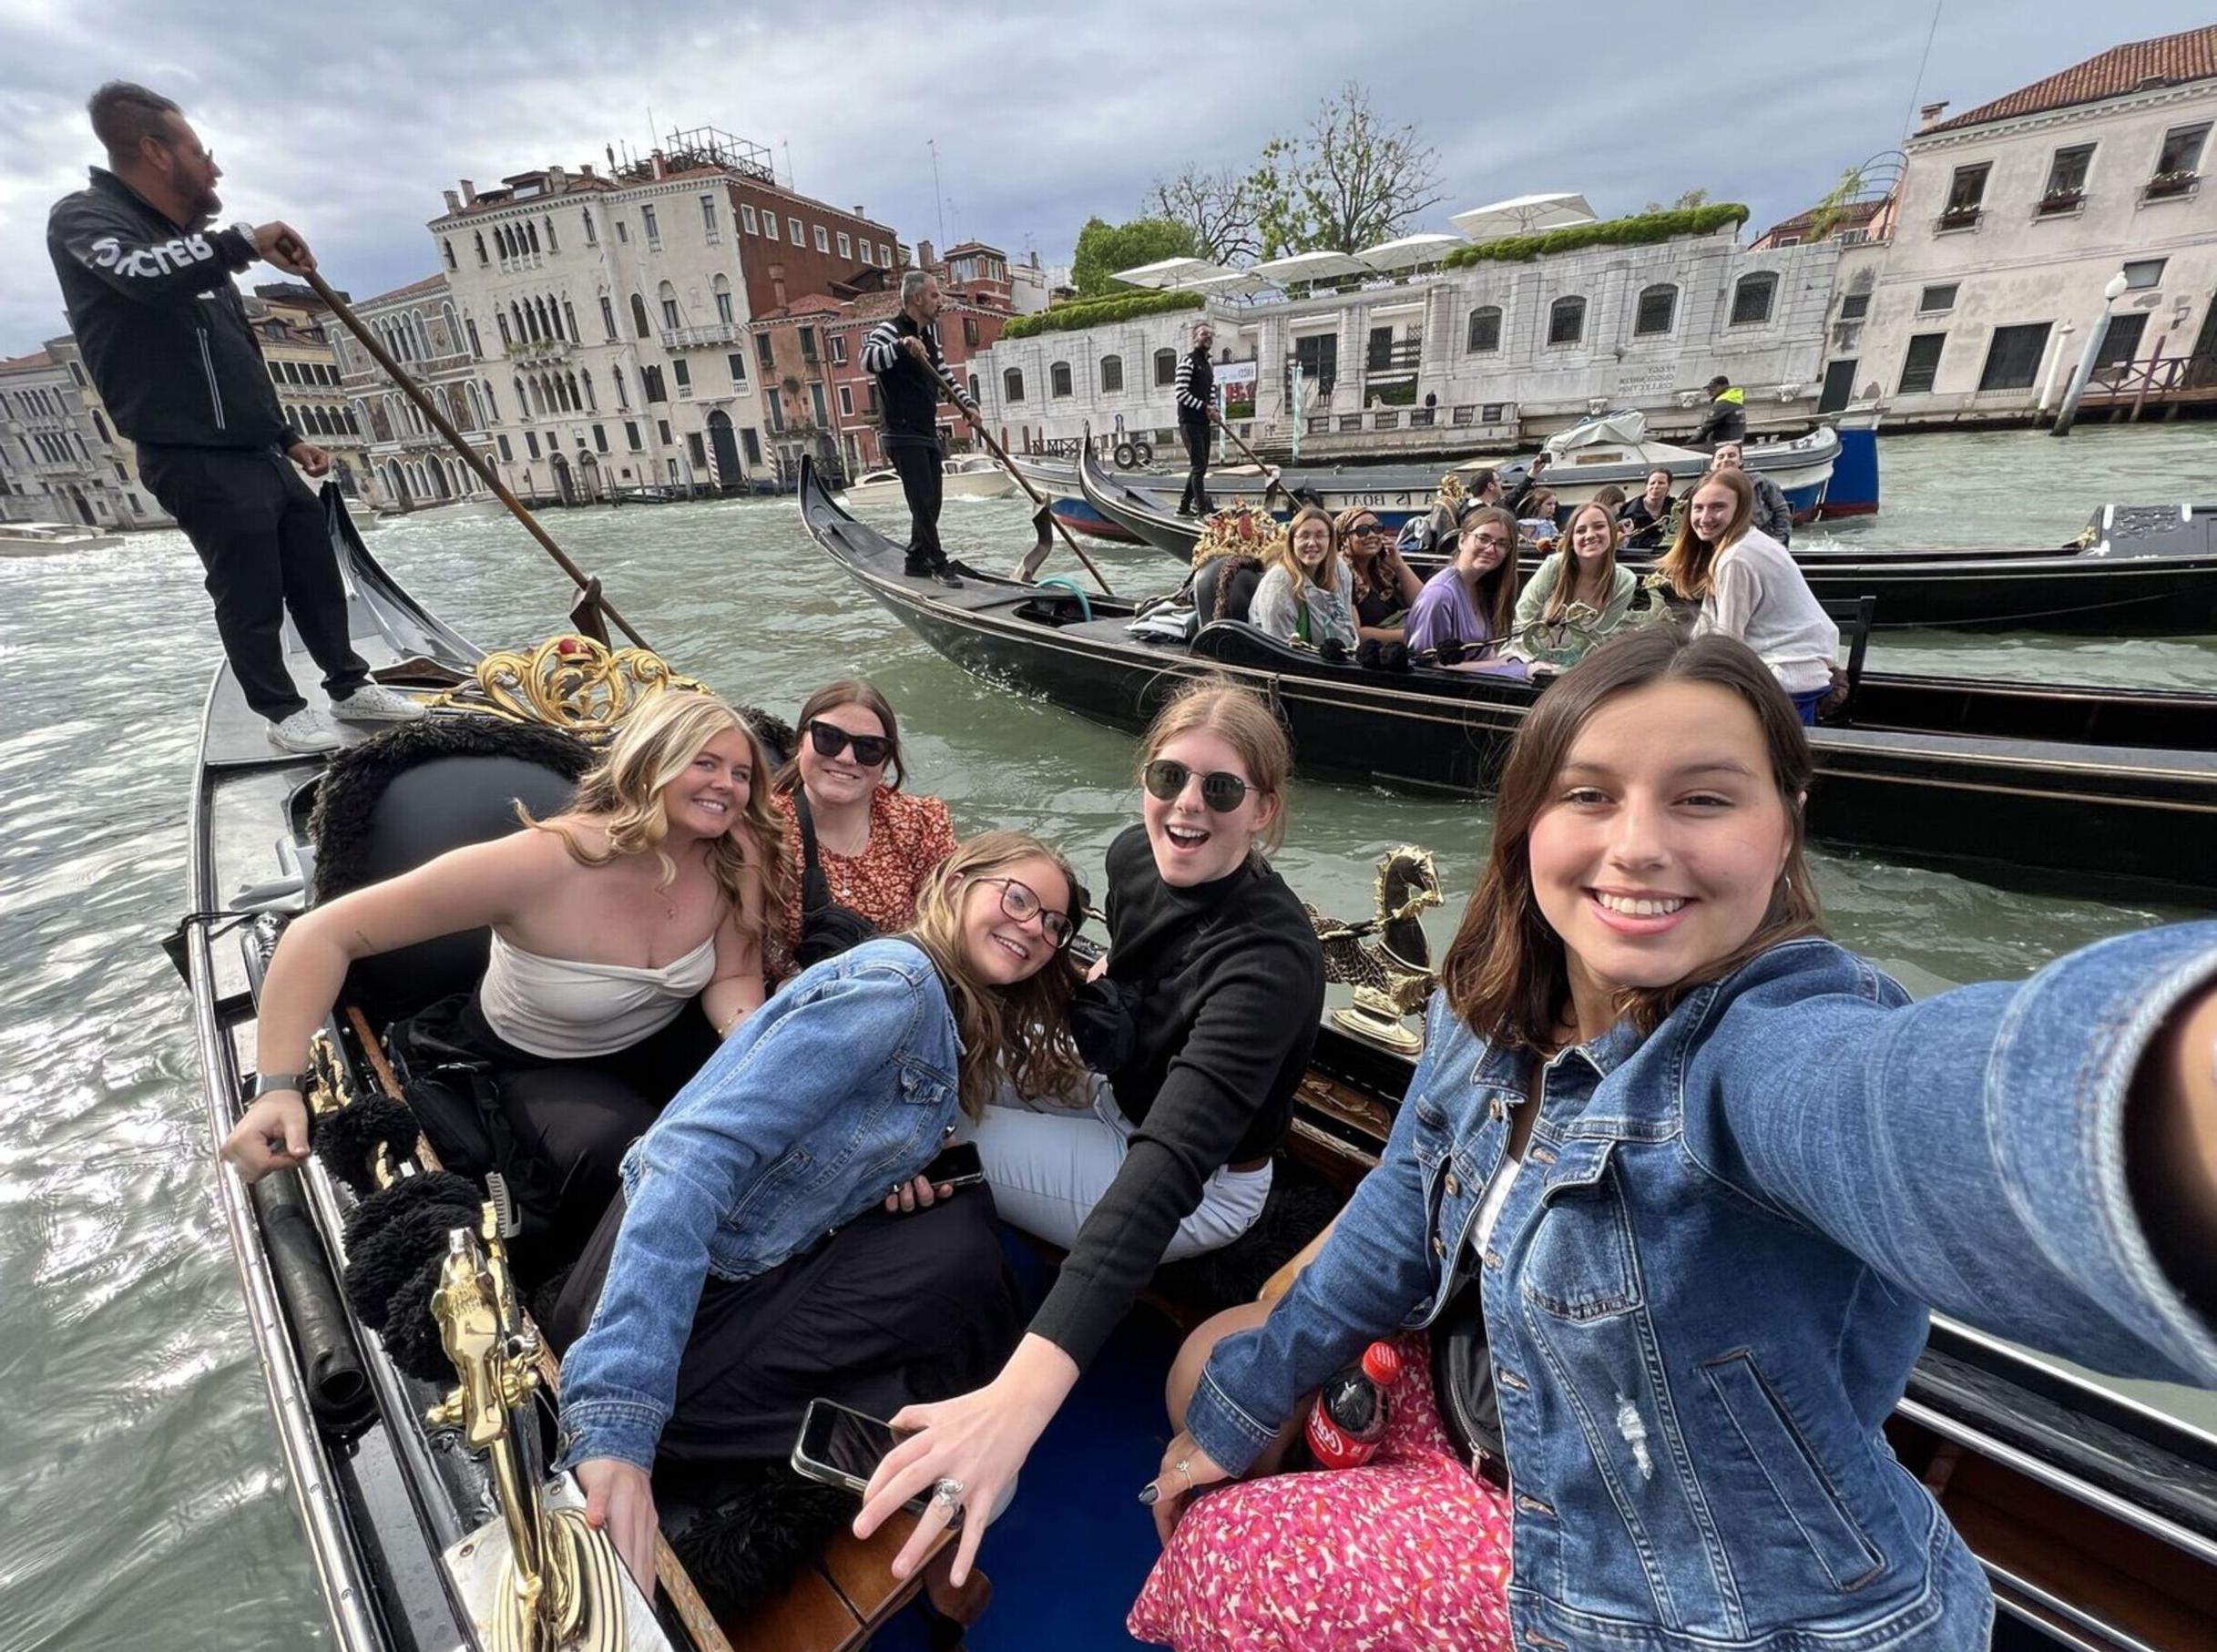 Education students pose for a selfie while riding multiple gondolas through Venice, Italy